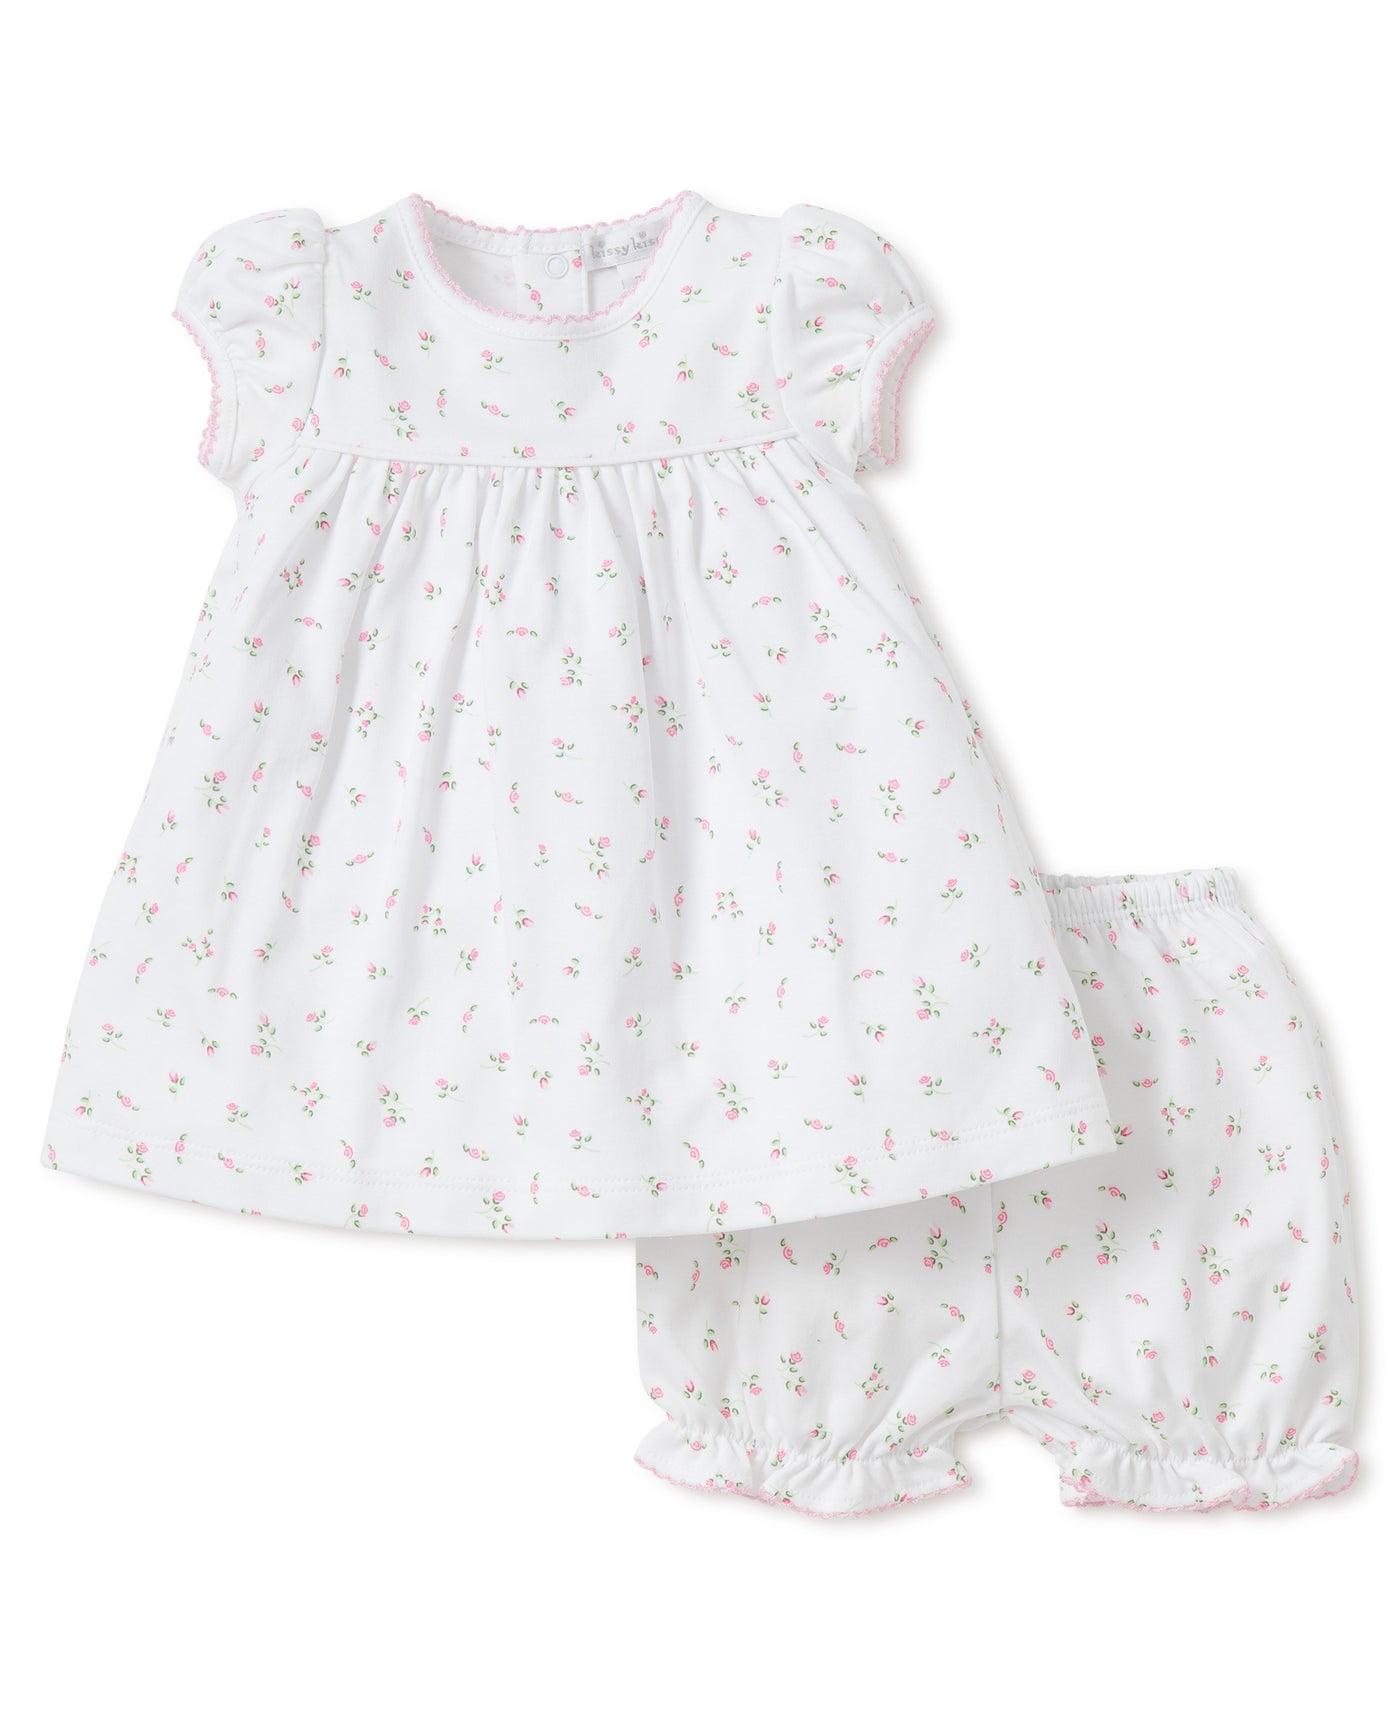 Garden Roses Print Dress with Bloomers